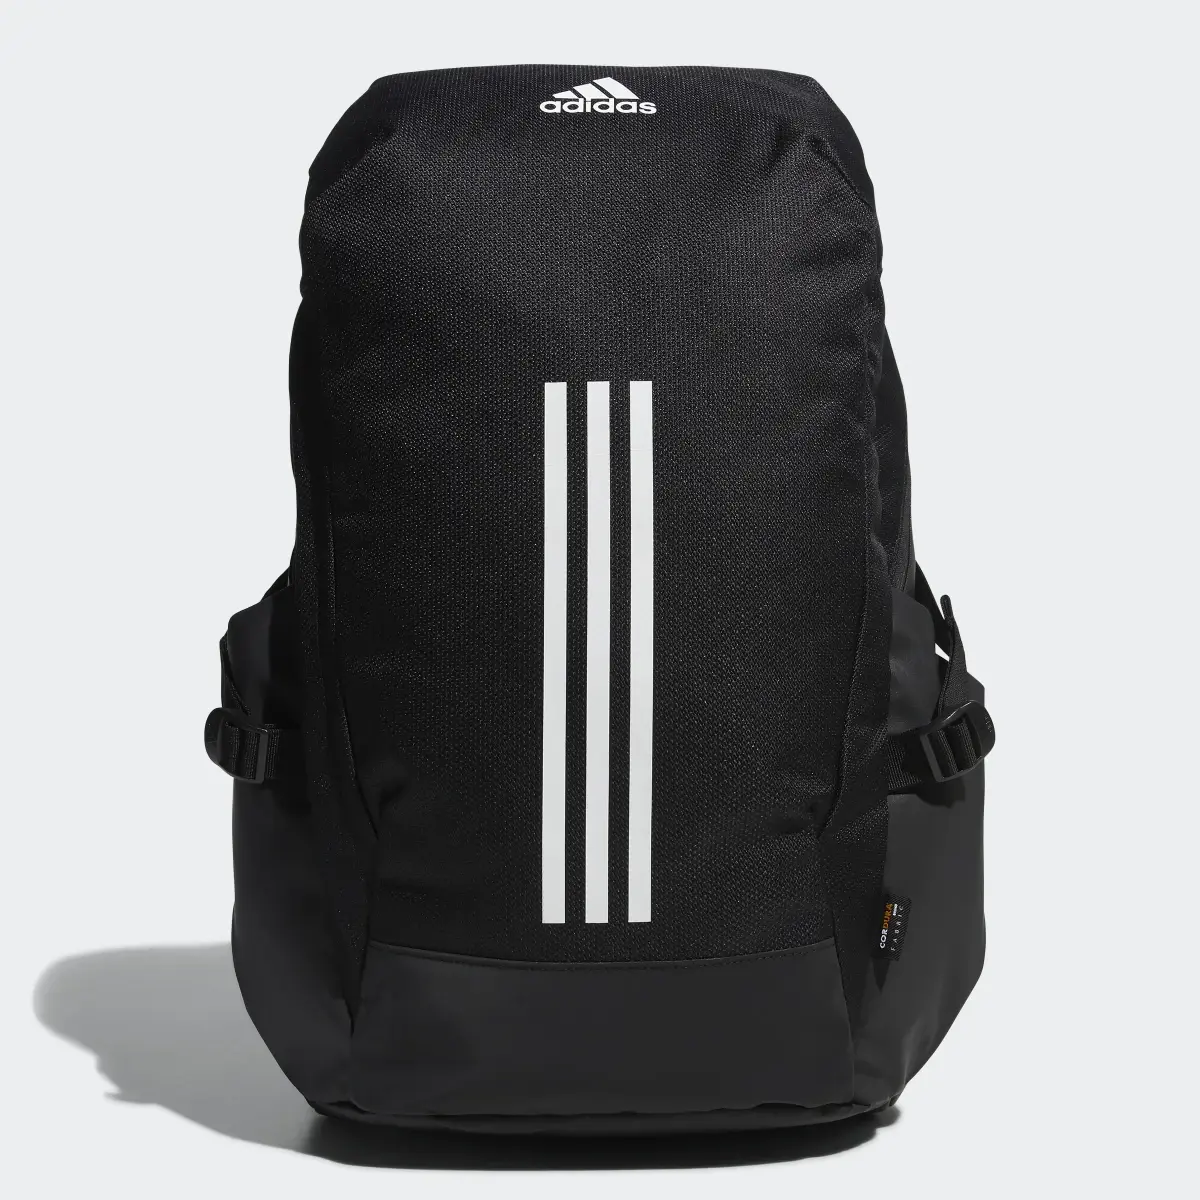 Adidas Endurance Packing System Backpack. 2